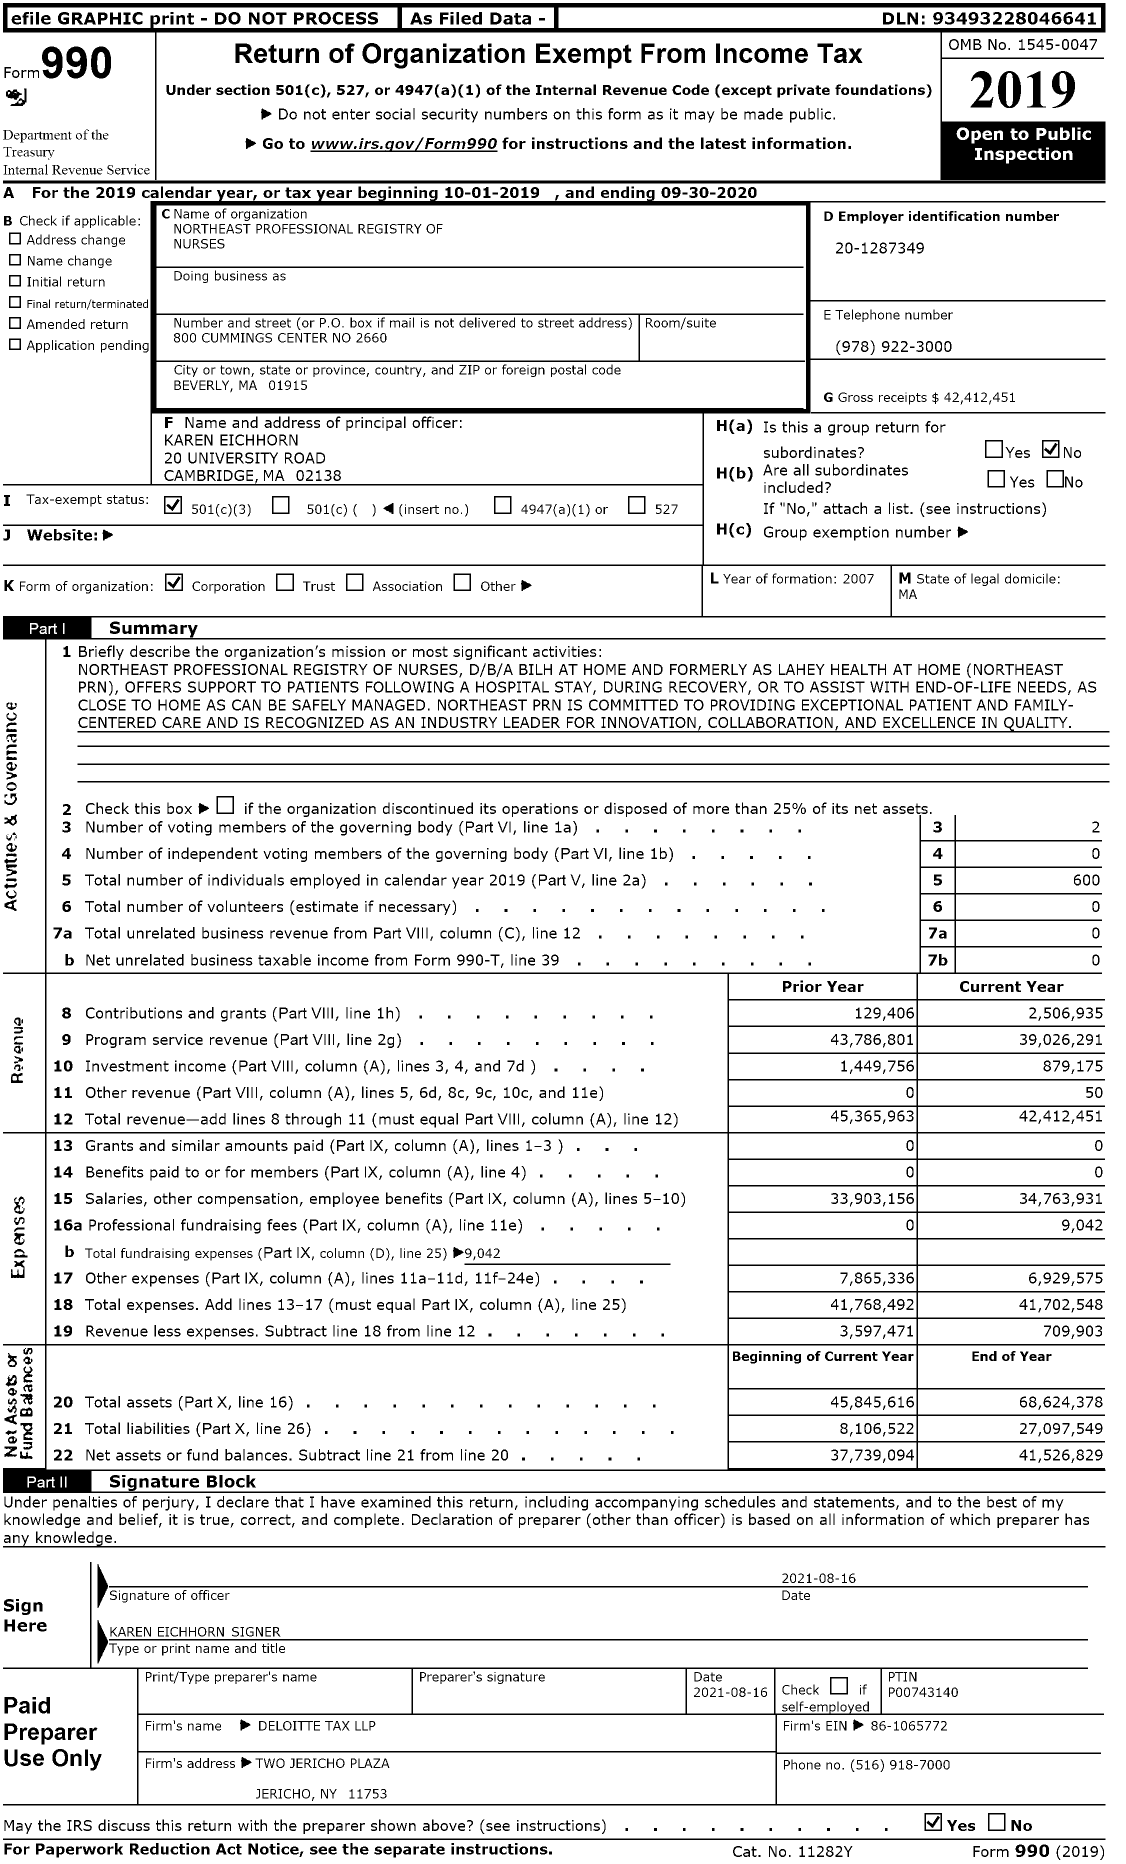 Image of first page of 2019 Form 990 for Northeast Professional Registry of Nurses